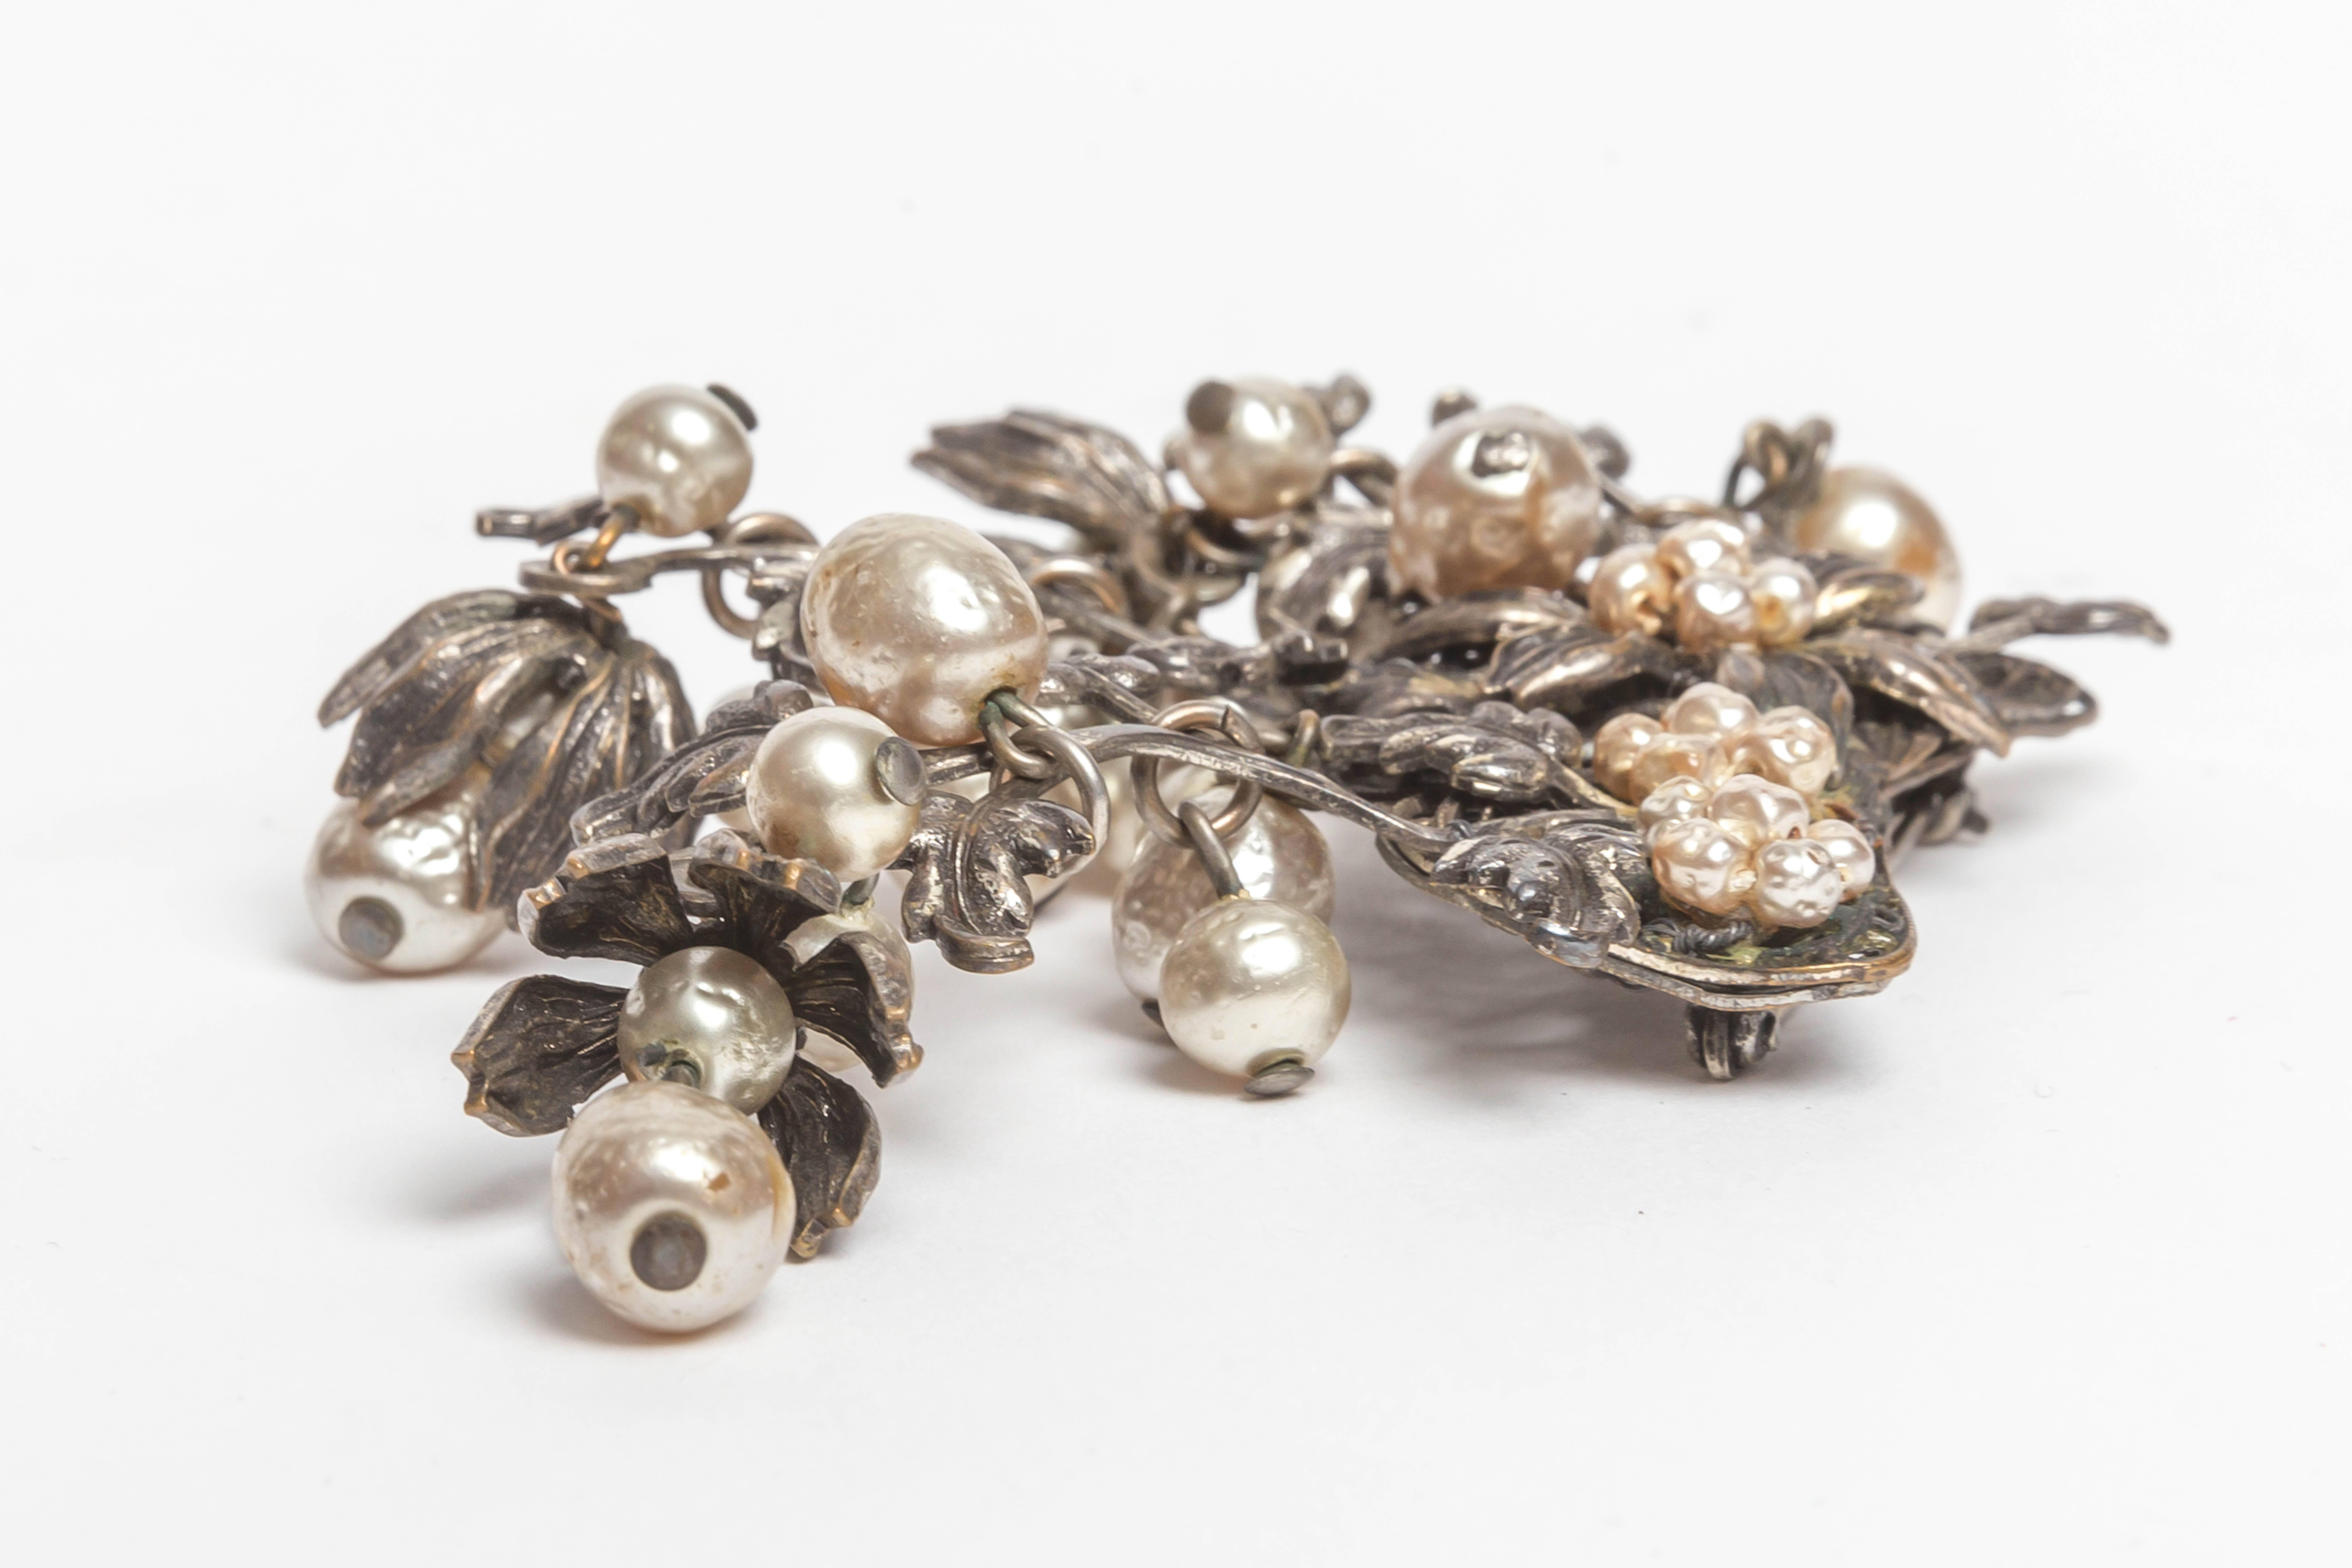 Women's Miriam Haskell Signature Brooch with Pearl Drops